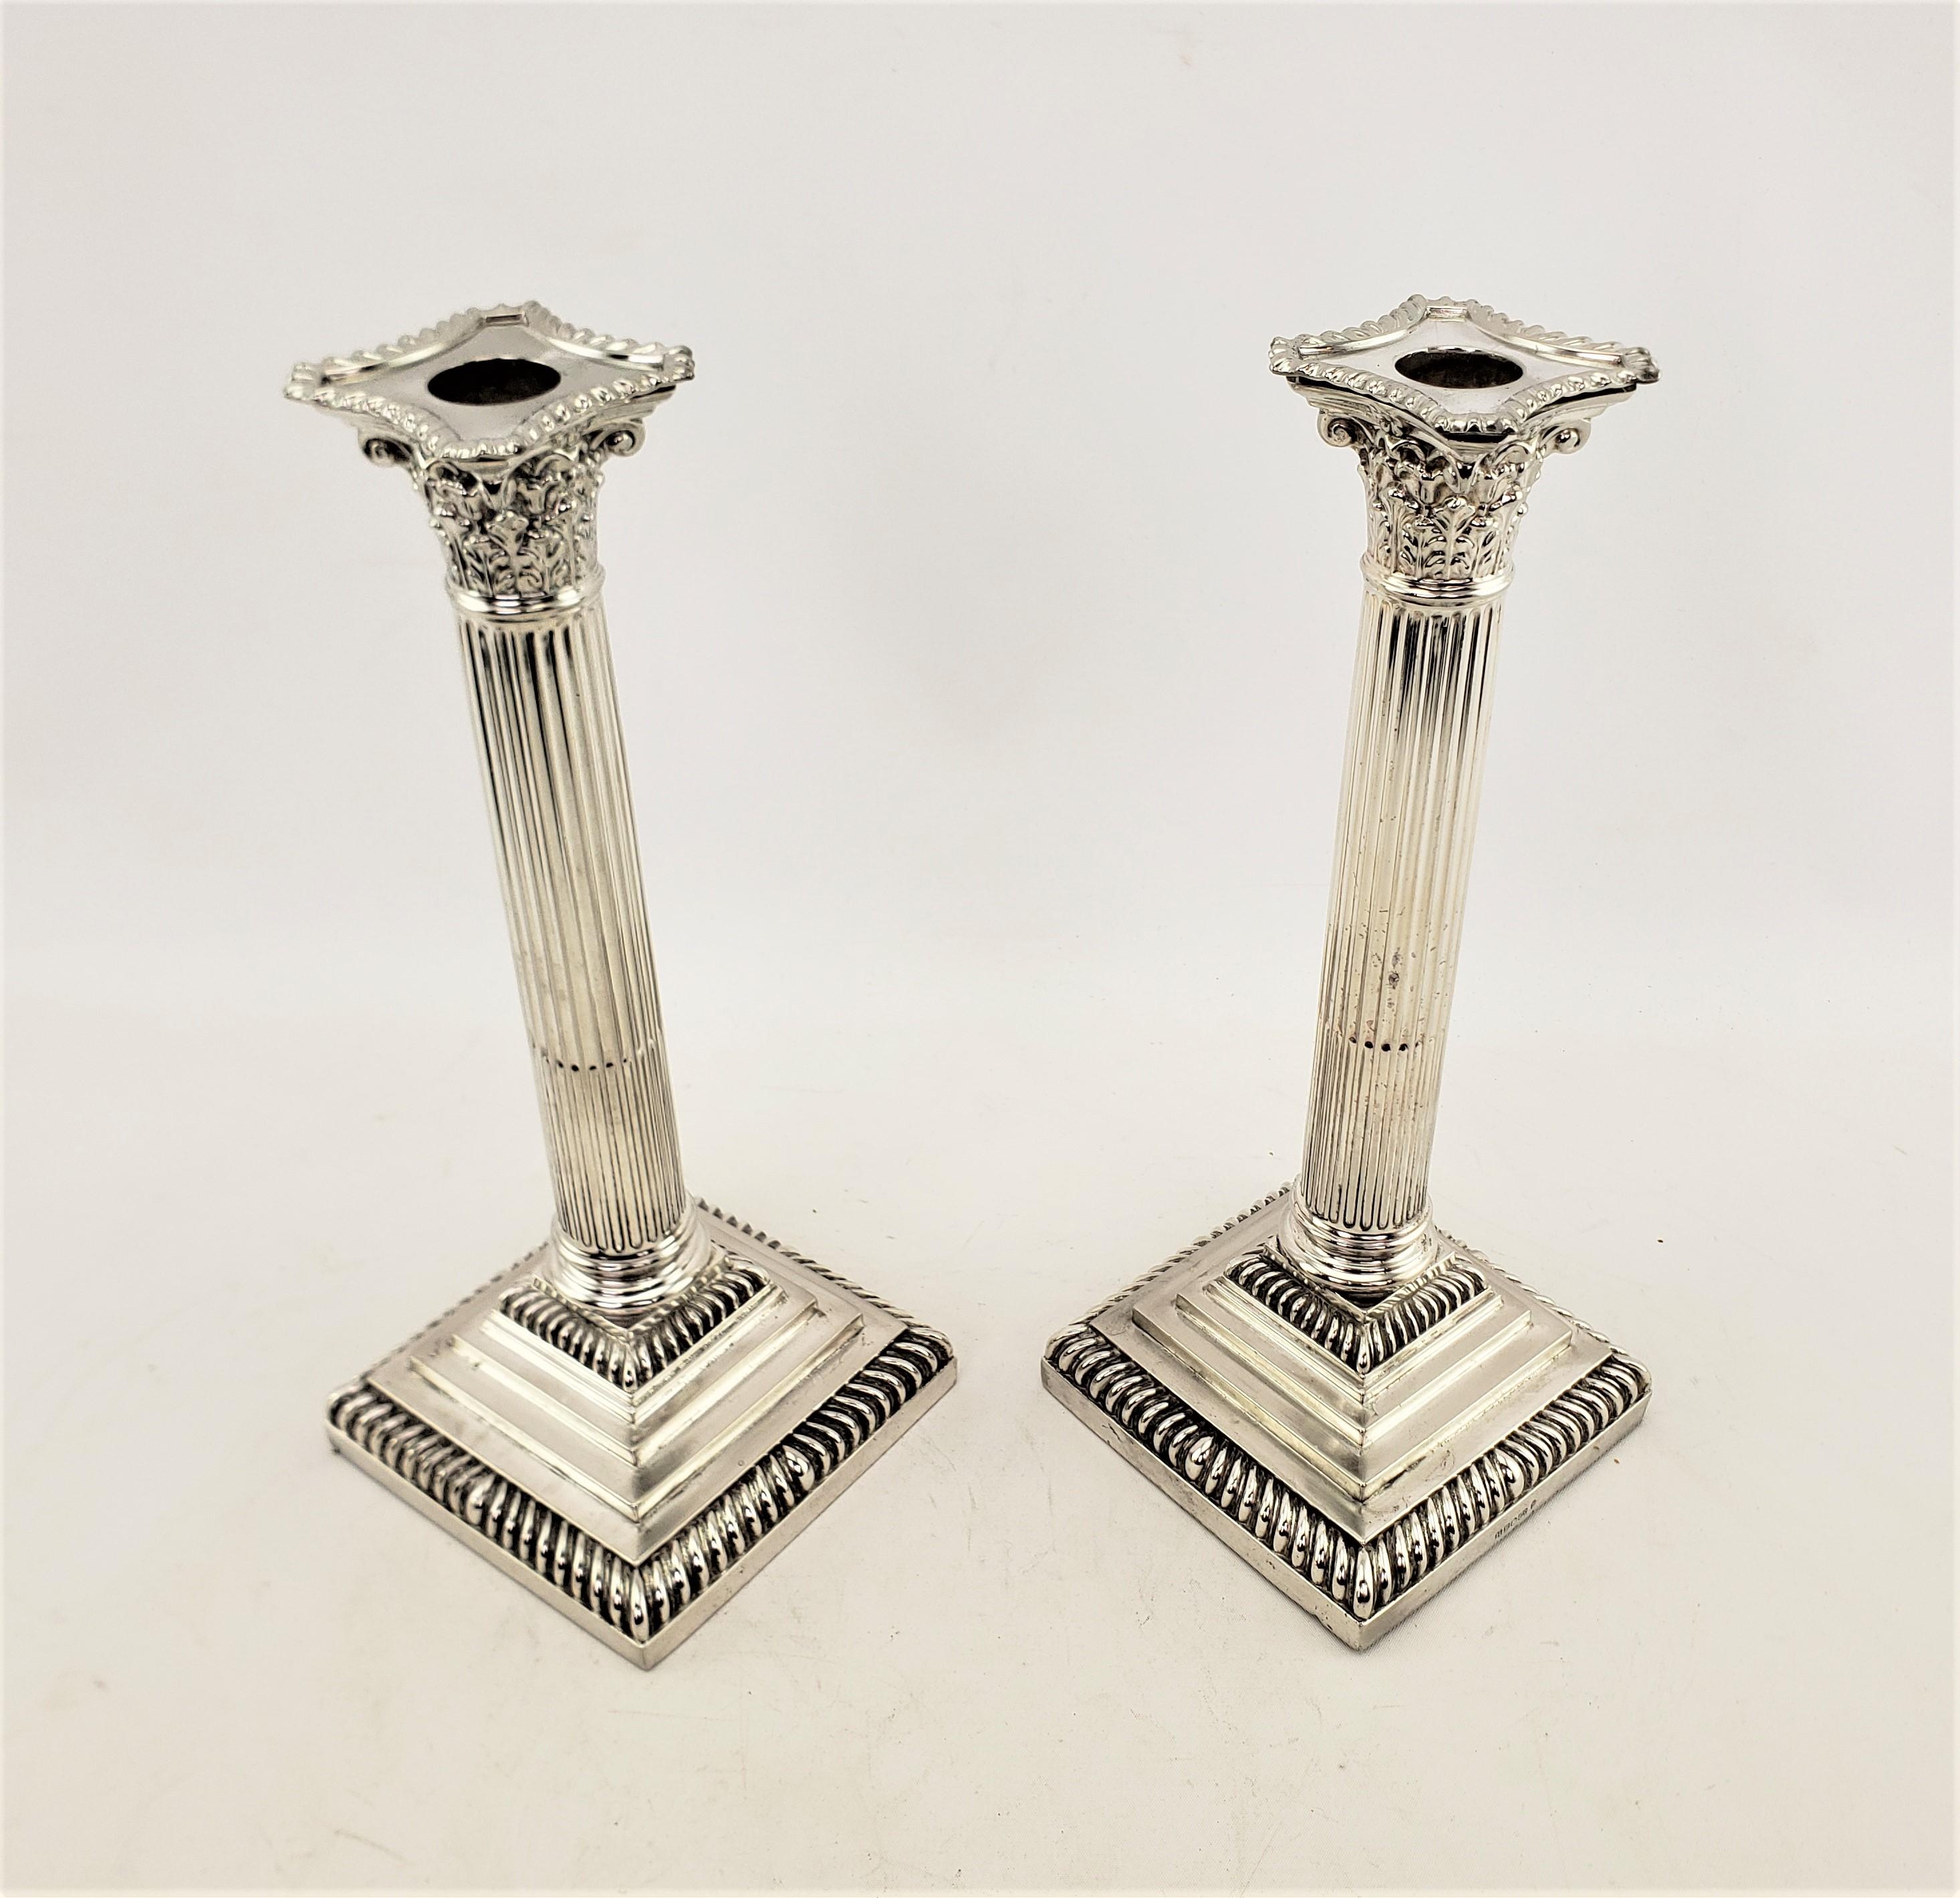 Pair of Antique English Silver Plated Candlesticks in a Corinthian Column Style In Good Condition For Sale In Hamilton, Ontario